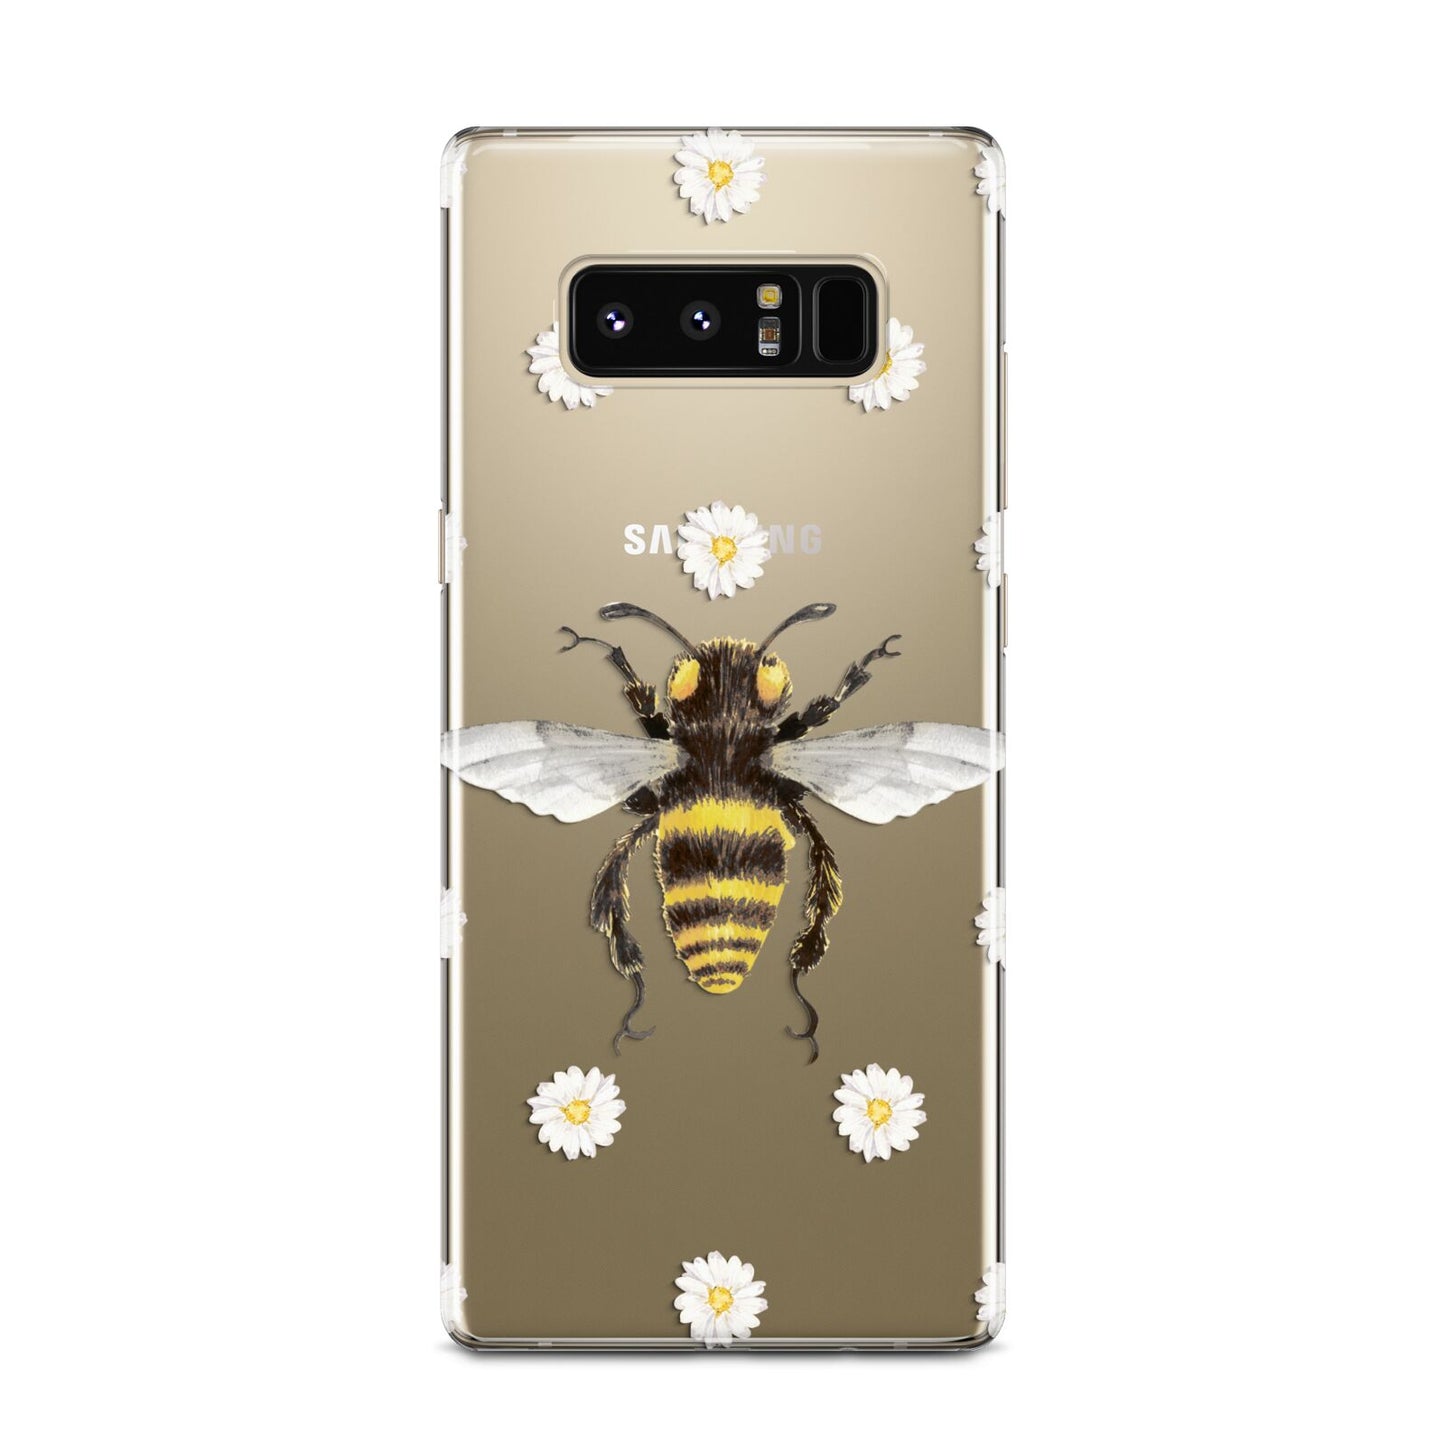 Bee Illustration with Daisies Samsung Galaxy Note 8 Case